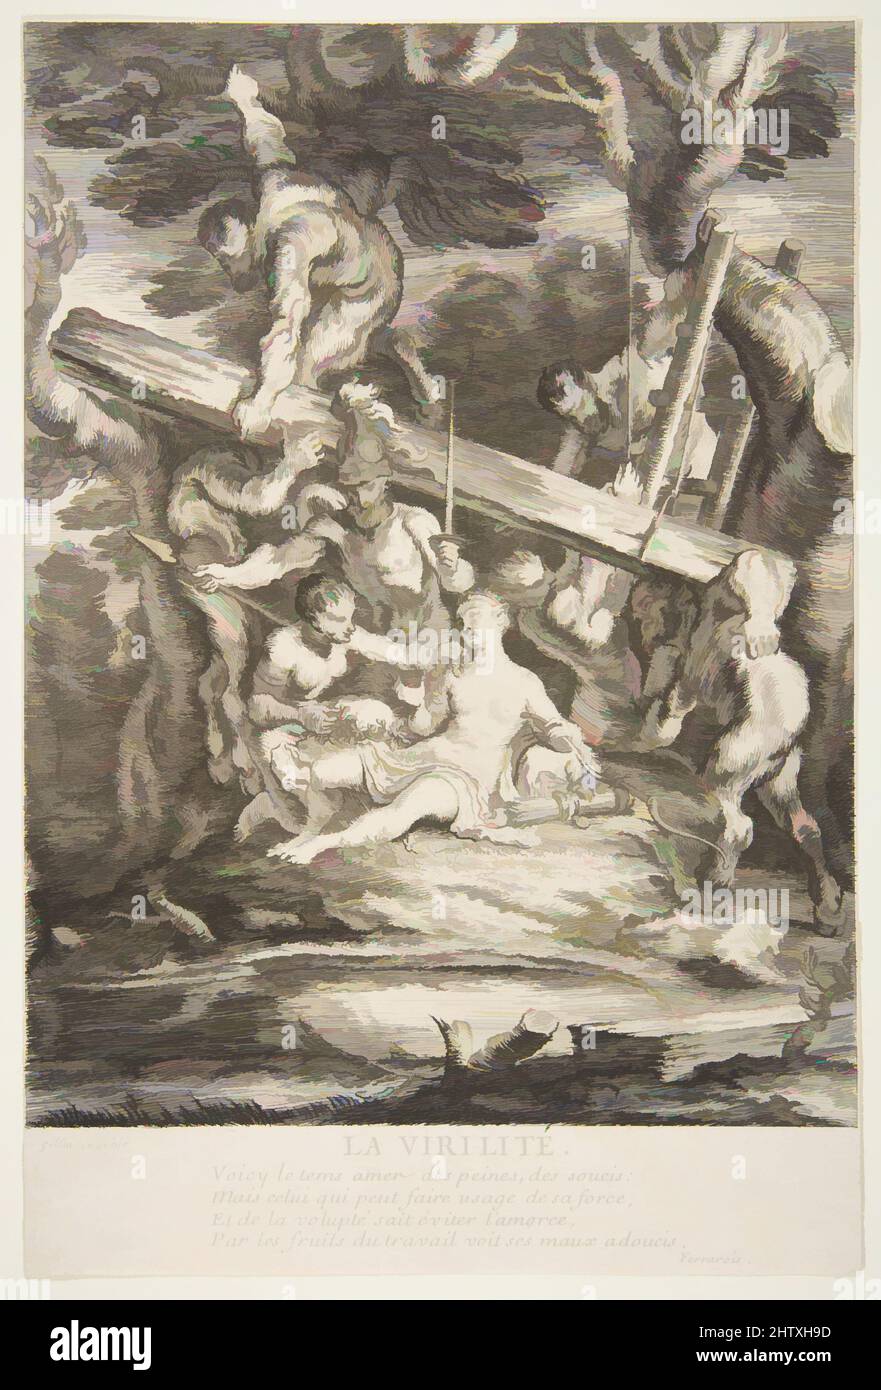 Art inspired by Manhood, n.d., Etching, image: 9 7/16 x 6 3/16 in. (23.9 x 15.7 cm), trimmed to image, Prints, Claude Gillot (French, Langres 1673–1722 Paris), Engraved by François Joullain (French, Paris 1697–1778 Paris, Classic works modernized by Artotop with a splash of modernity. Shapes, color and value, eye-catching visual impact on art. Emotions through freedom of artworks in a contemporary way. A timeless message pursuing a wildly creative new direction. Artists turning to the digital medium and creating the Artotop NFT Stock Photo